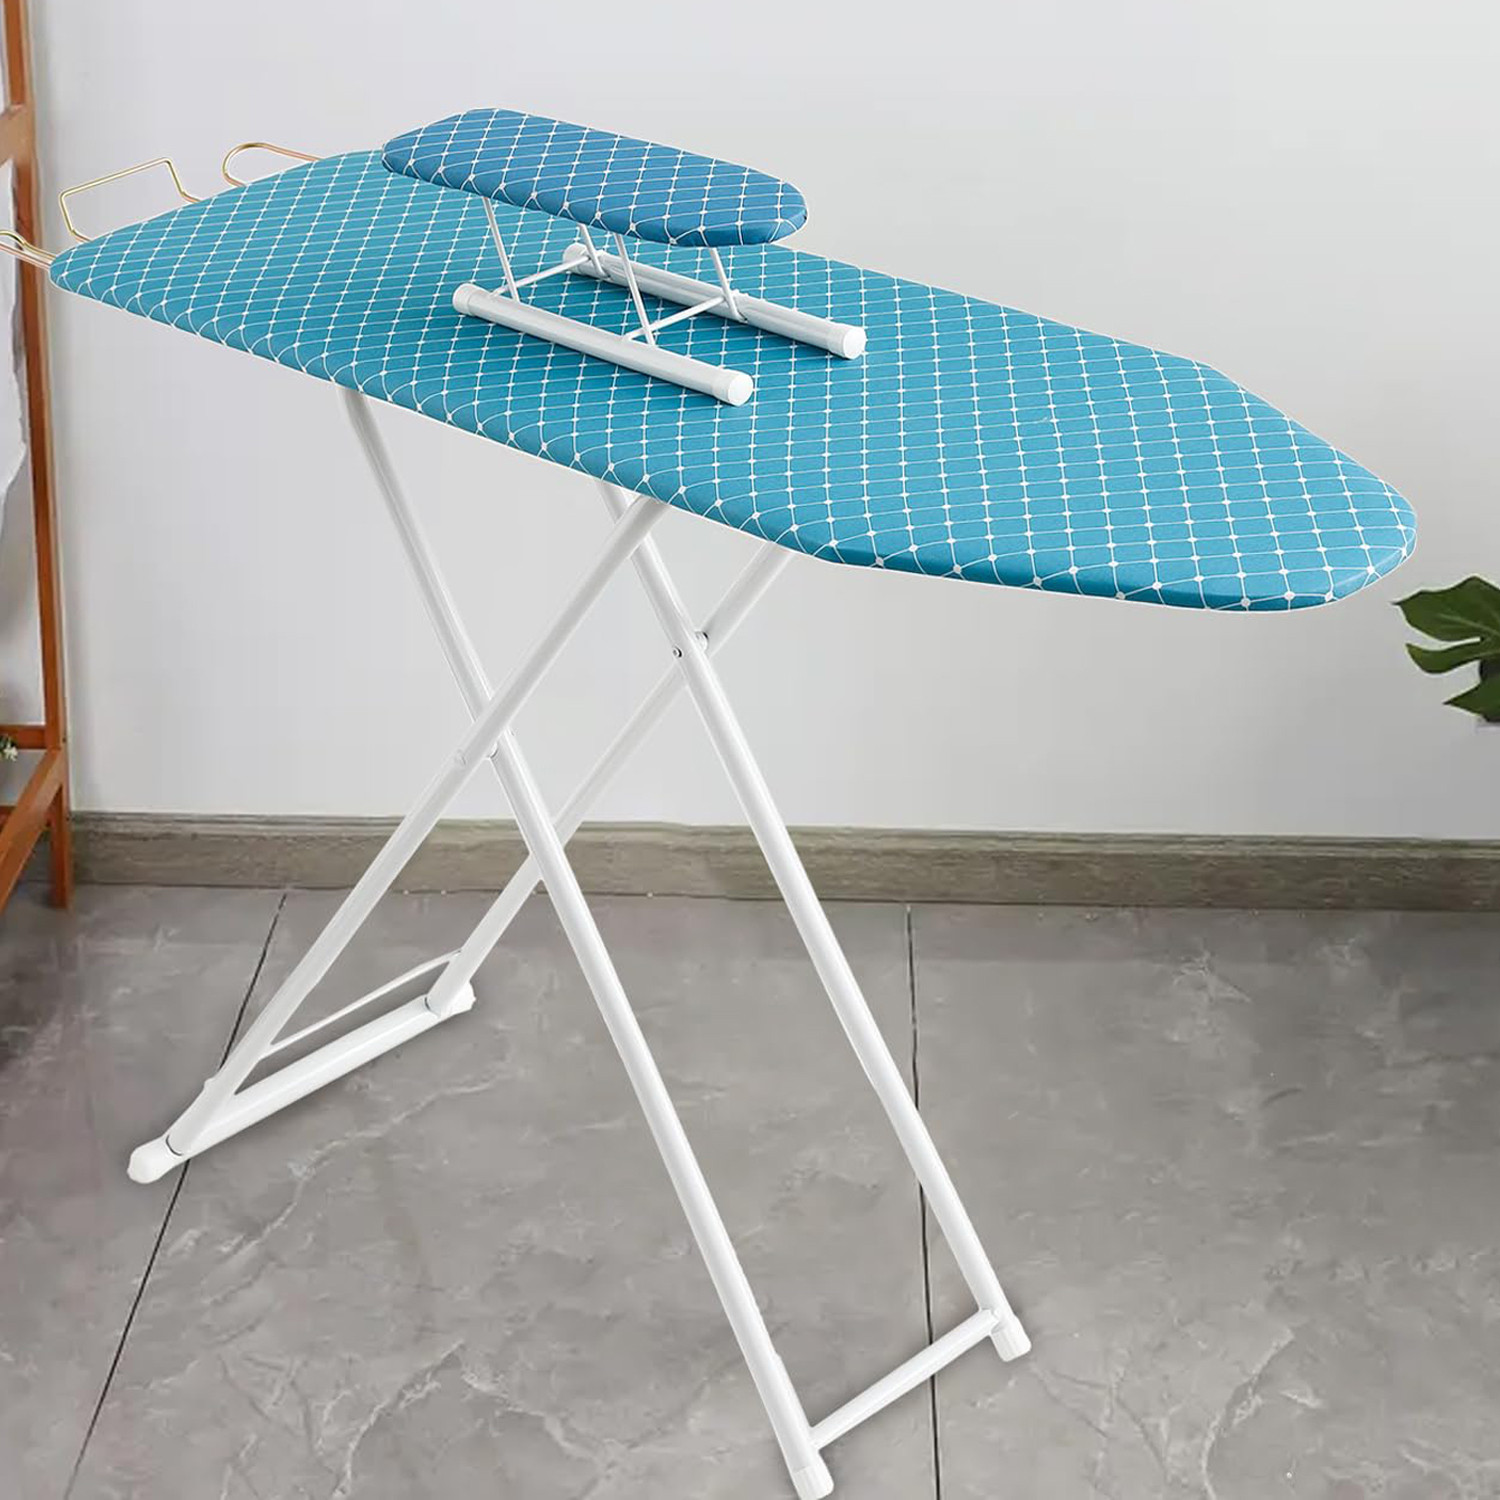 Kuber Industries 42 Inch Ironing Board With Small Board|Ironing Stand For Clothes|Press Table for Home (Blue)